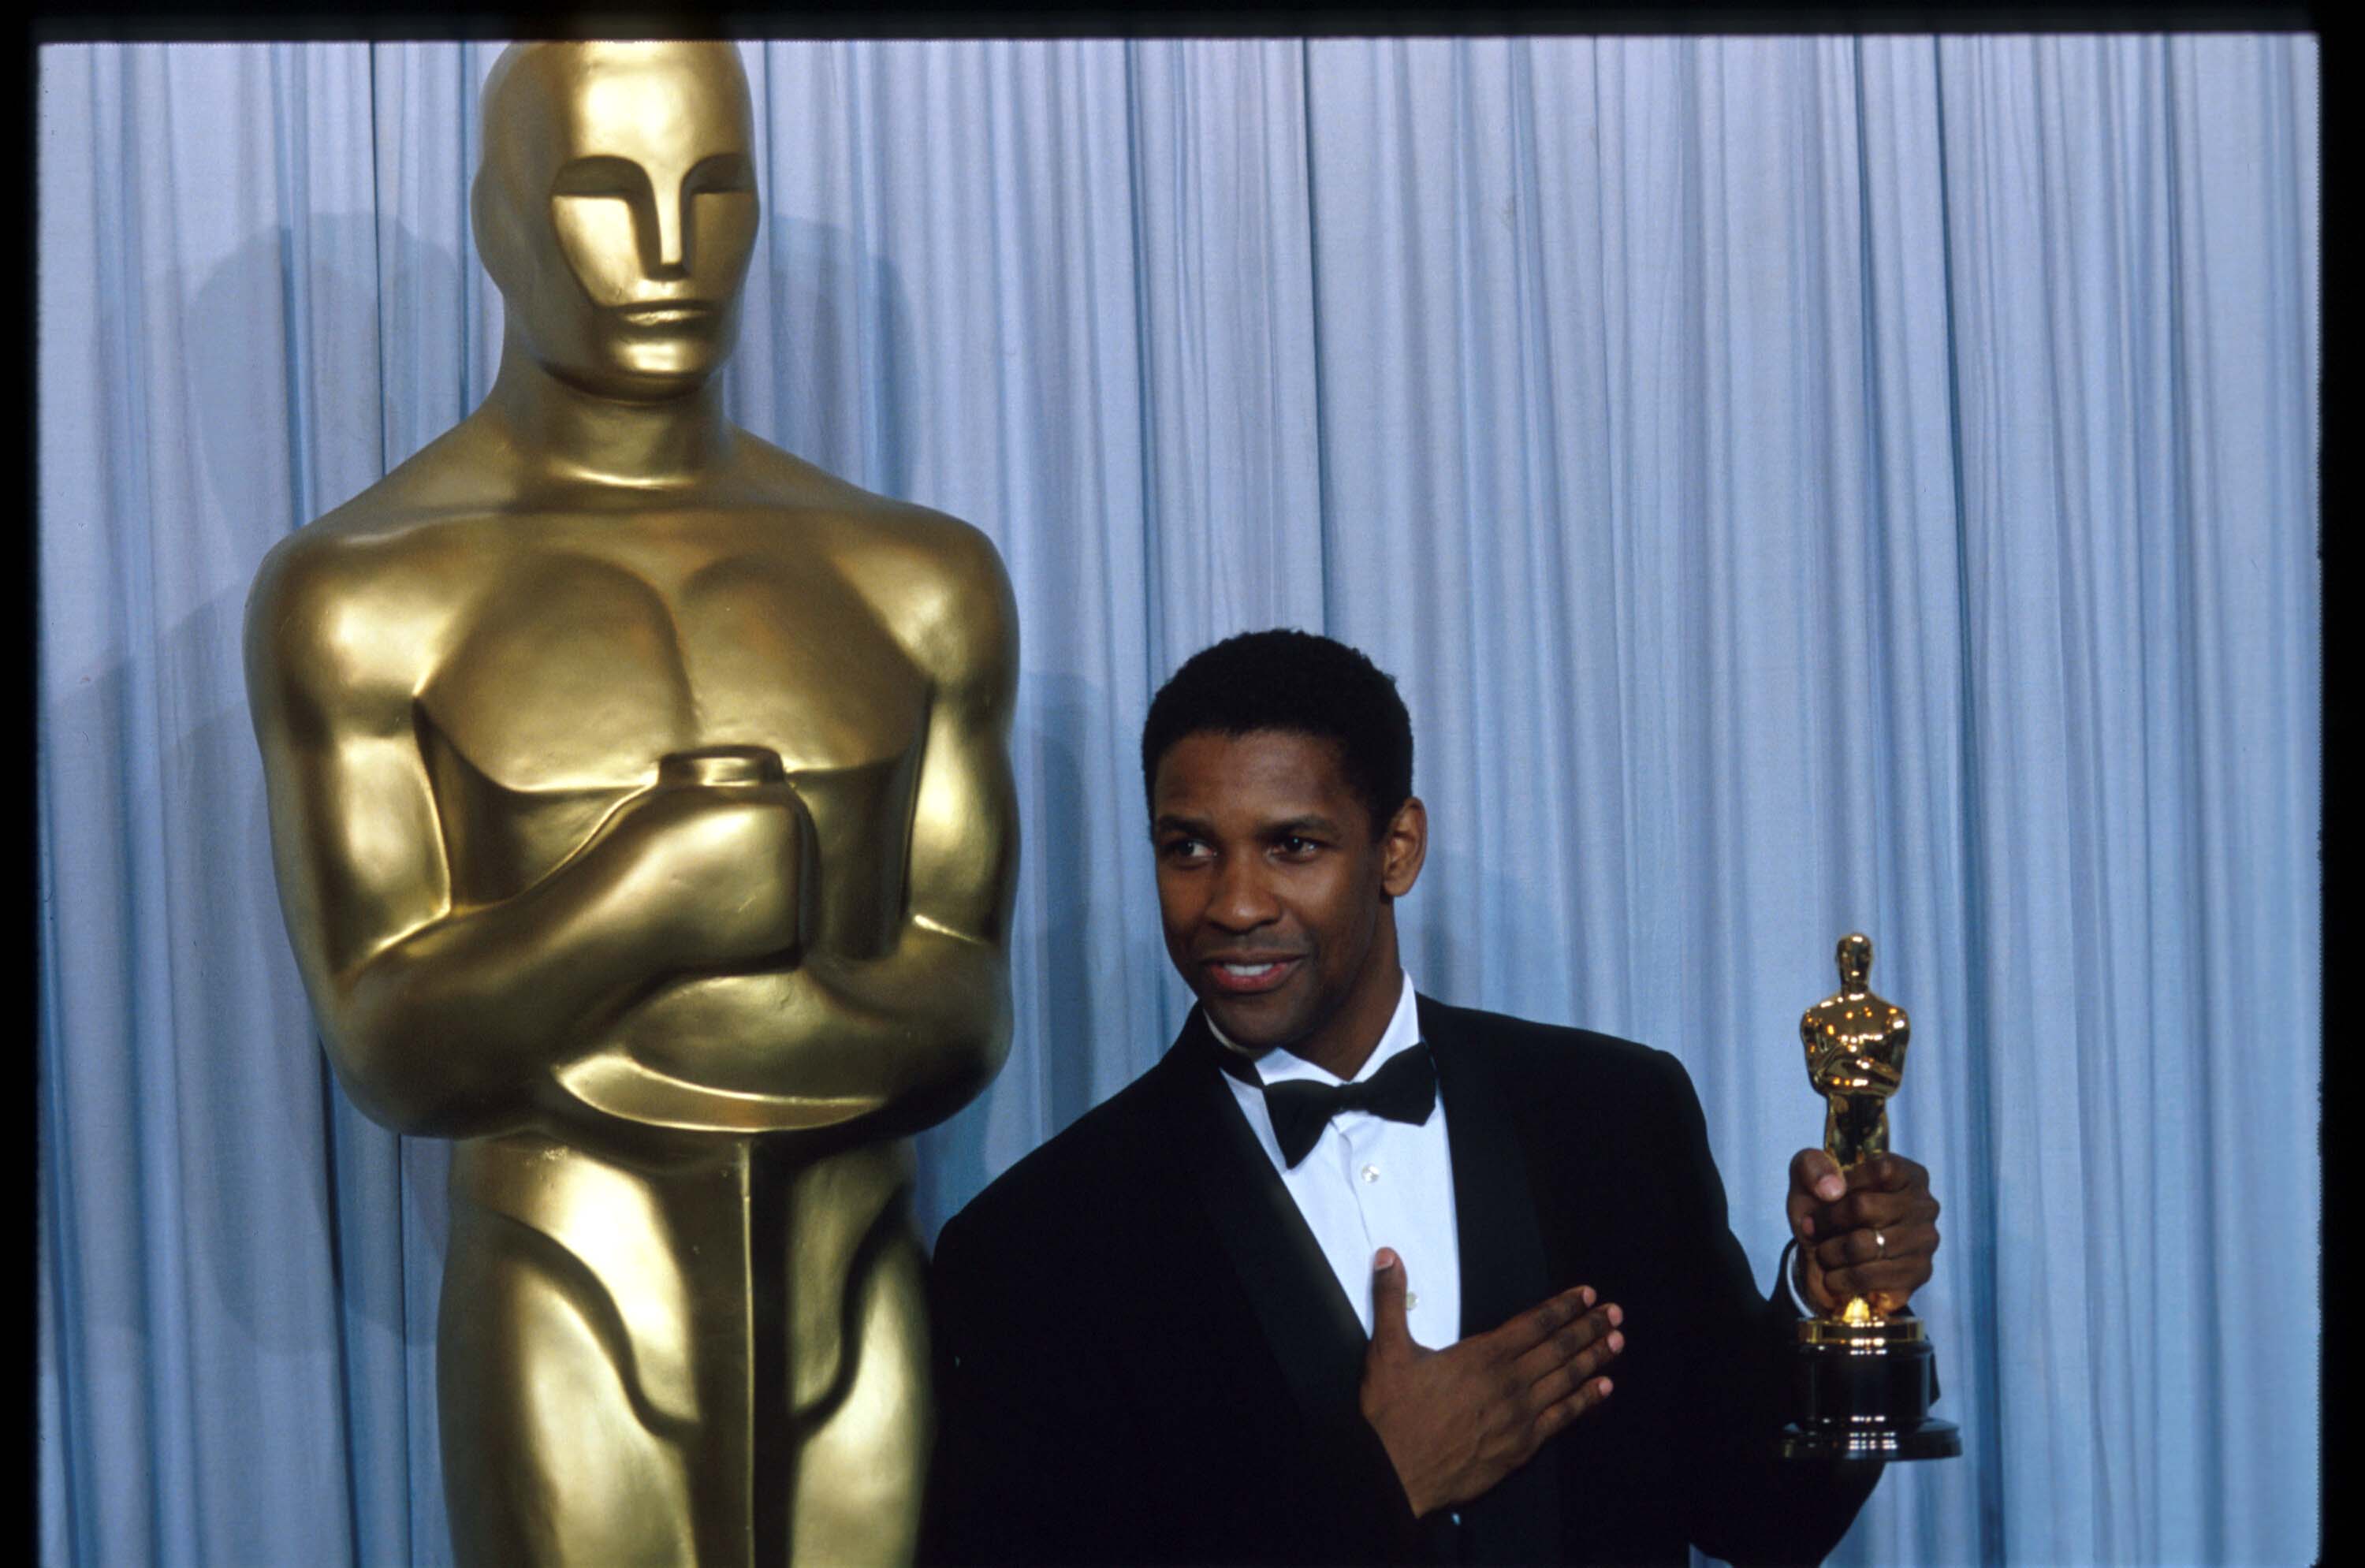 Denzel Washington stands backstage during the 62nd Academy Awards ceremony in 1990 after winning an Oscar for Best Actor in a Supporting Role for Glory